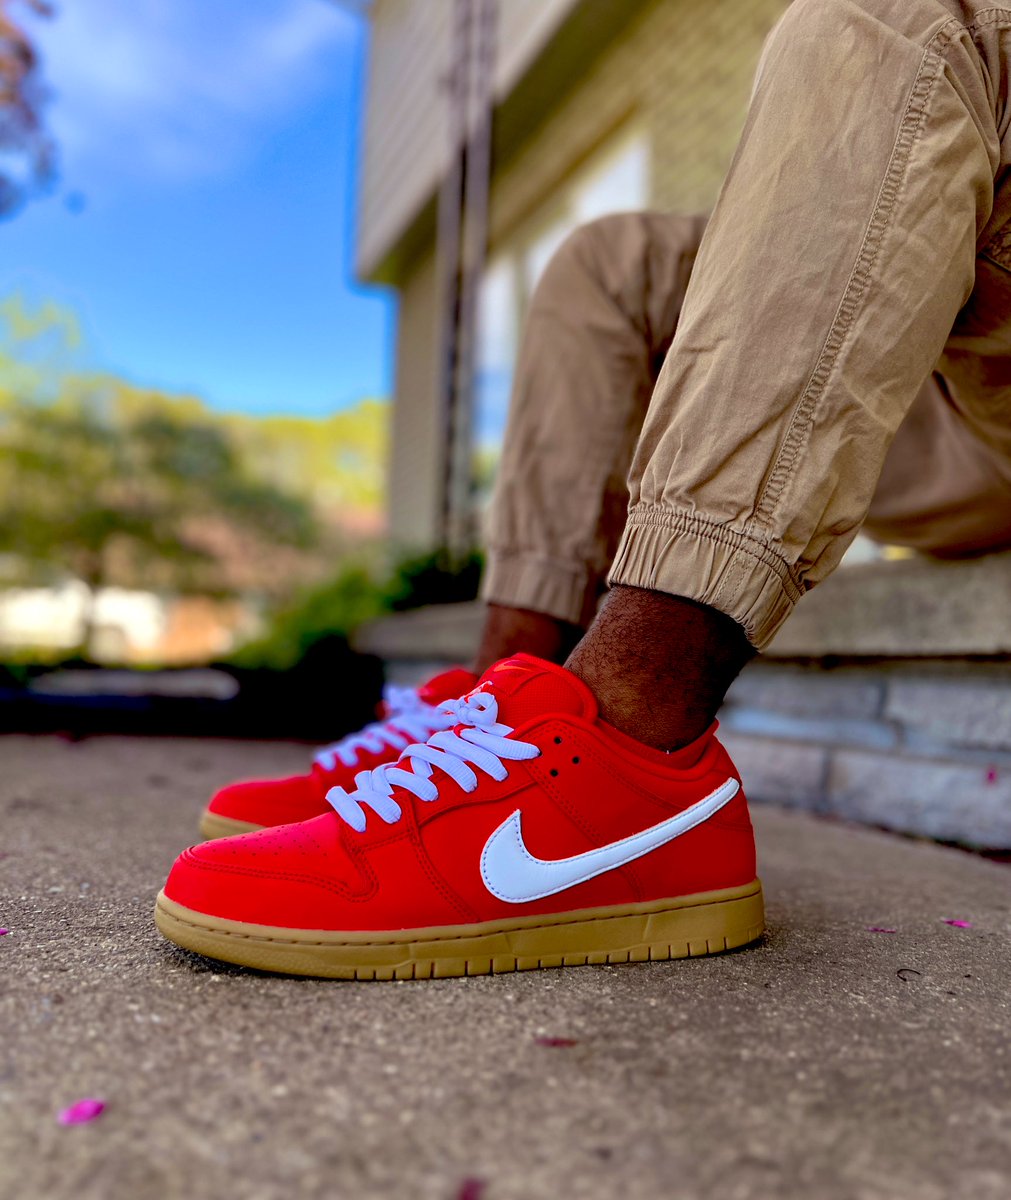 These look so much better in person #kotd #kickcheck #snkrs #snkrslibeheatingup #shoessofresh #yoursneakersaredope #snkrskickcheck #nike #dunks #iphonephotography